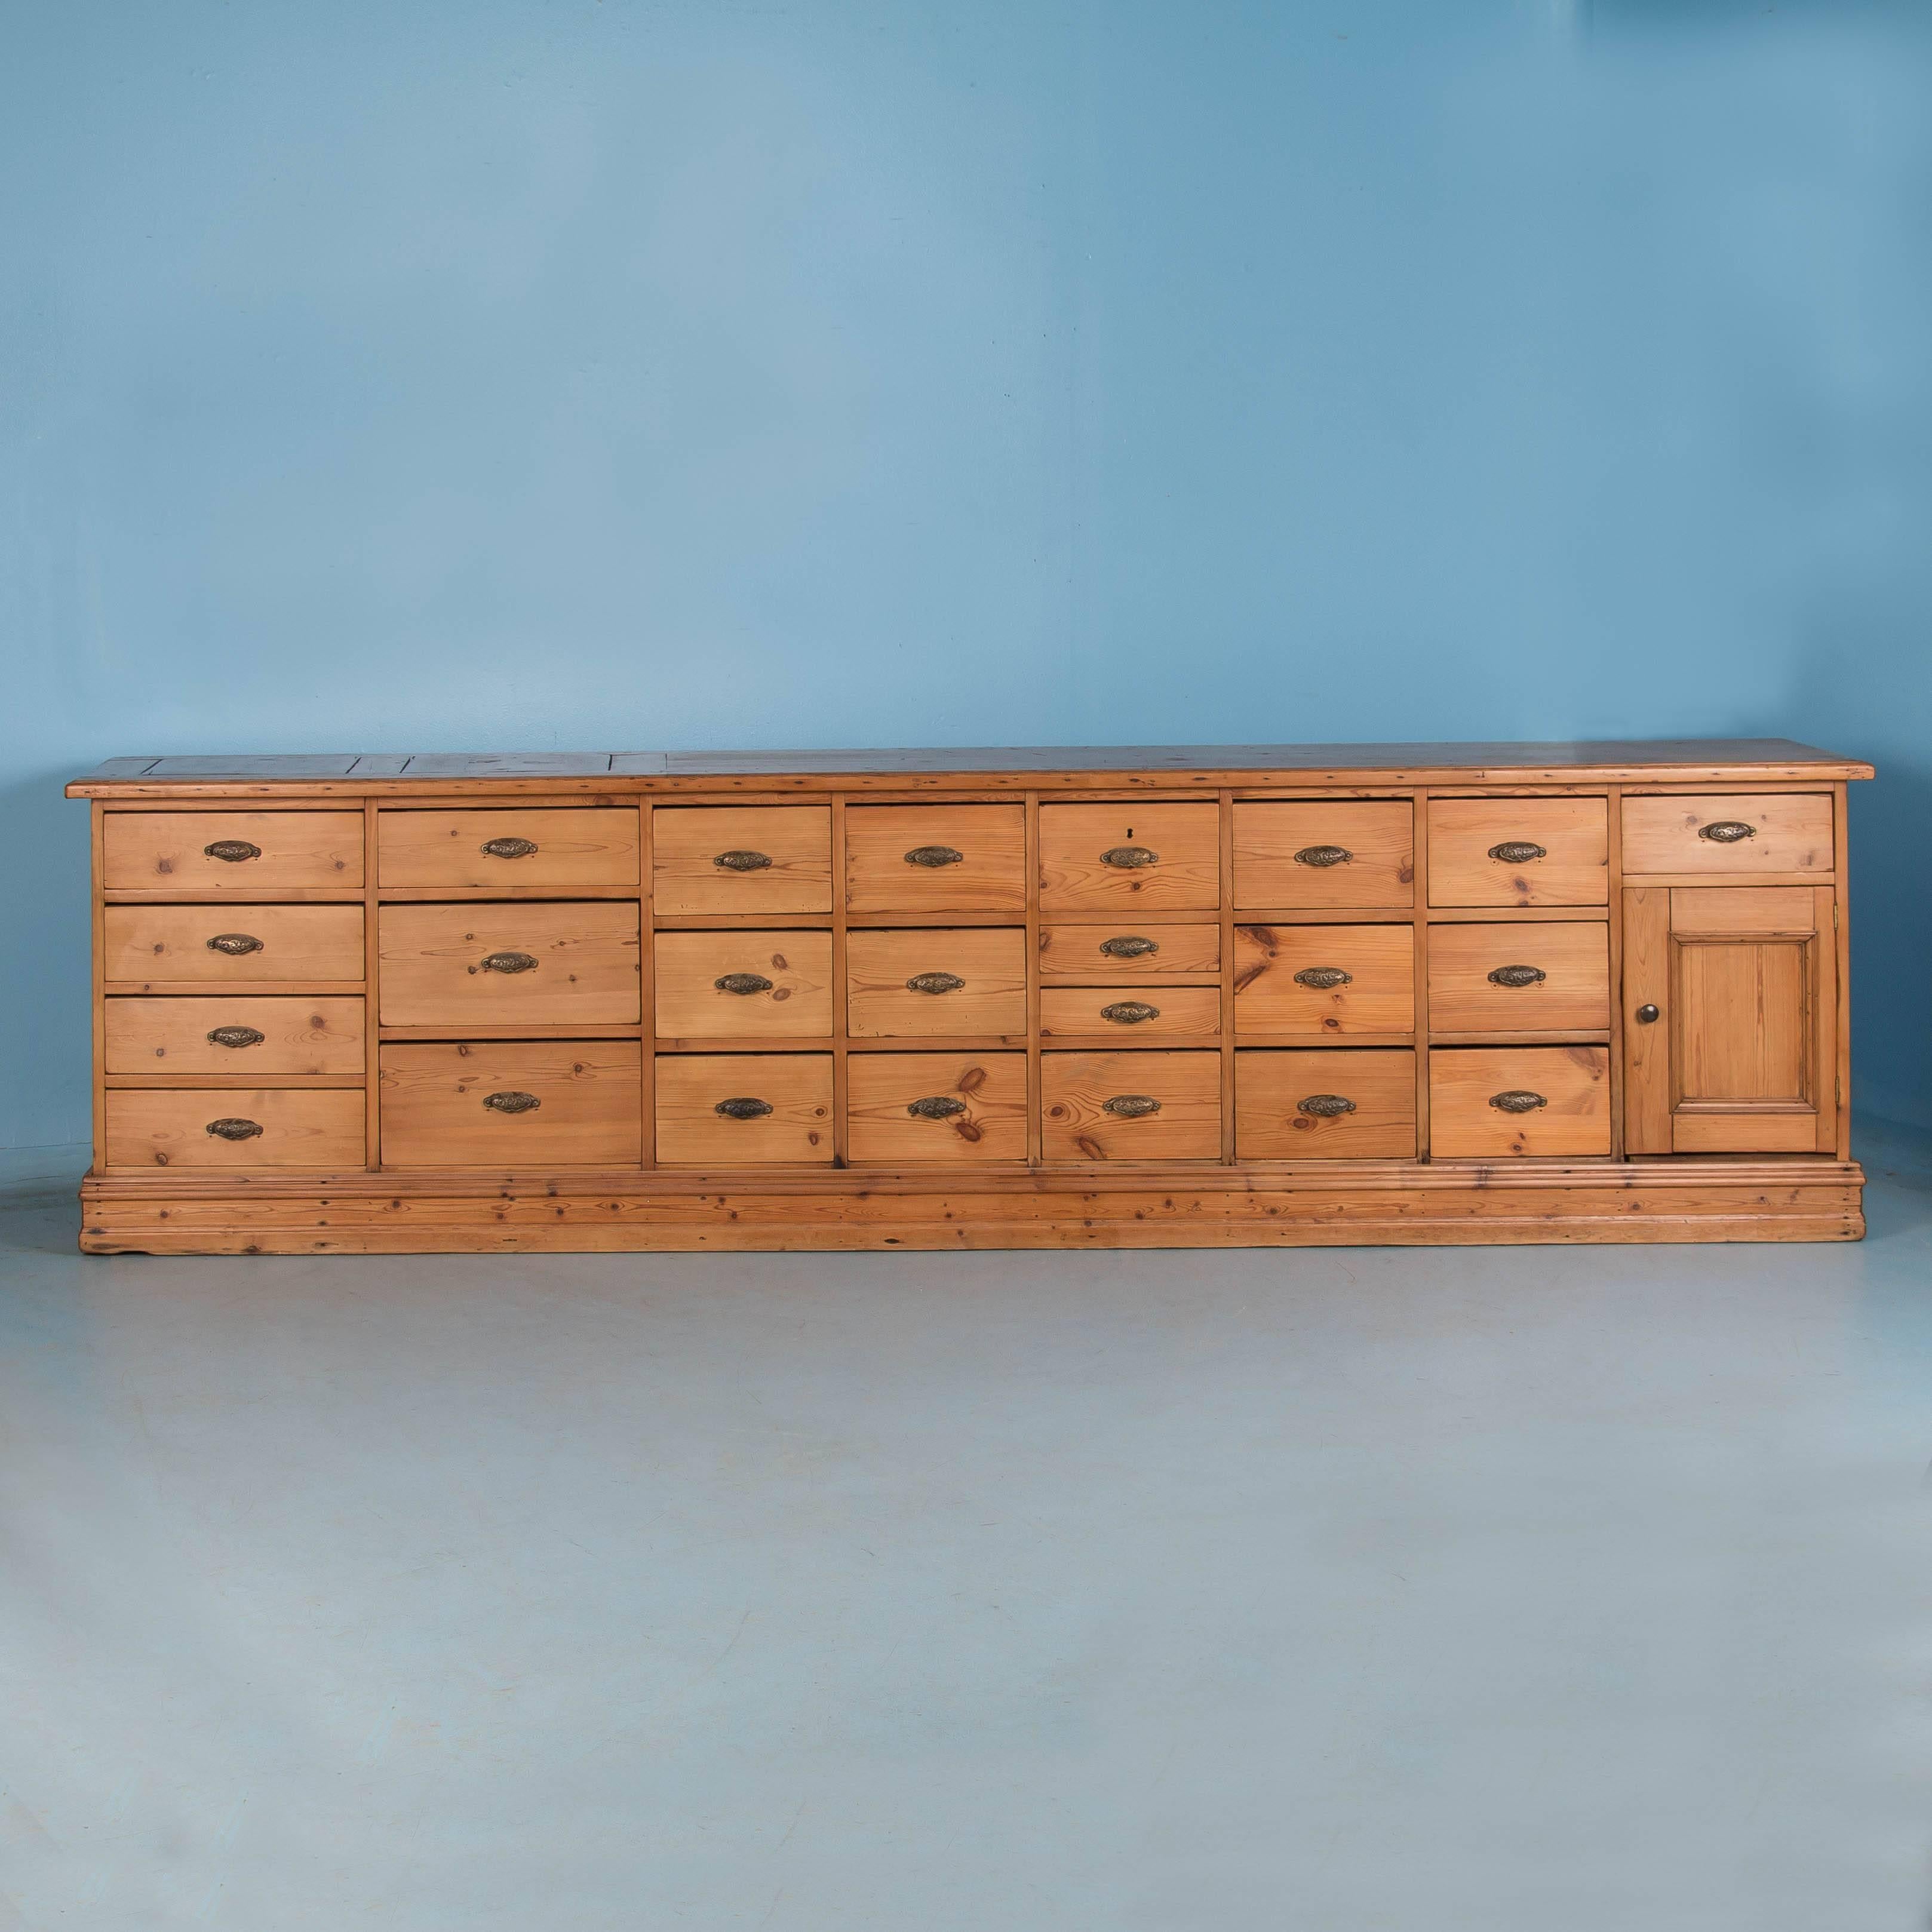 This long and very unusual antique pine grocer's cabinet from Denmark, was purpose built with 24 drawers in a variety of sizes and originally served as shop counter in the mid-1800s. The sides and back are finished with panelling, allowing this